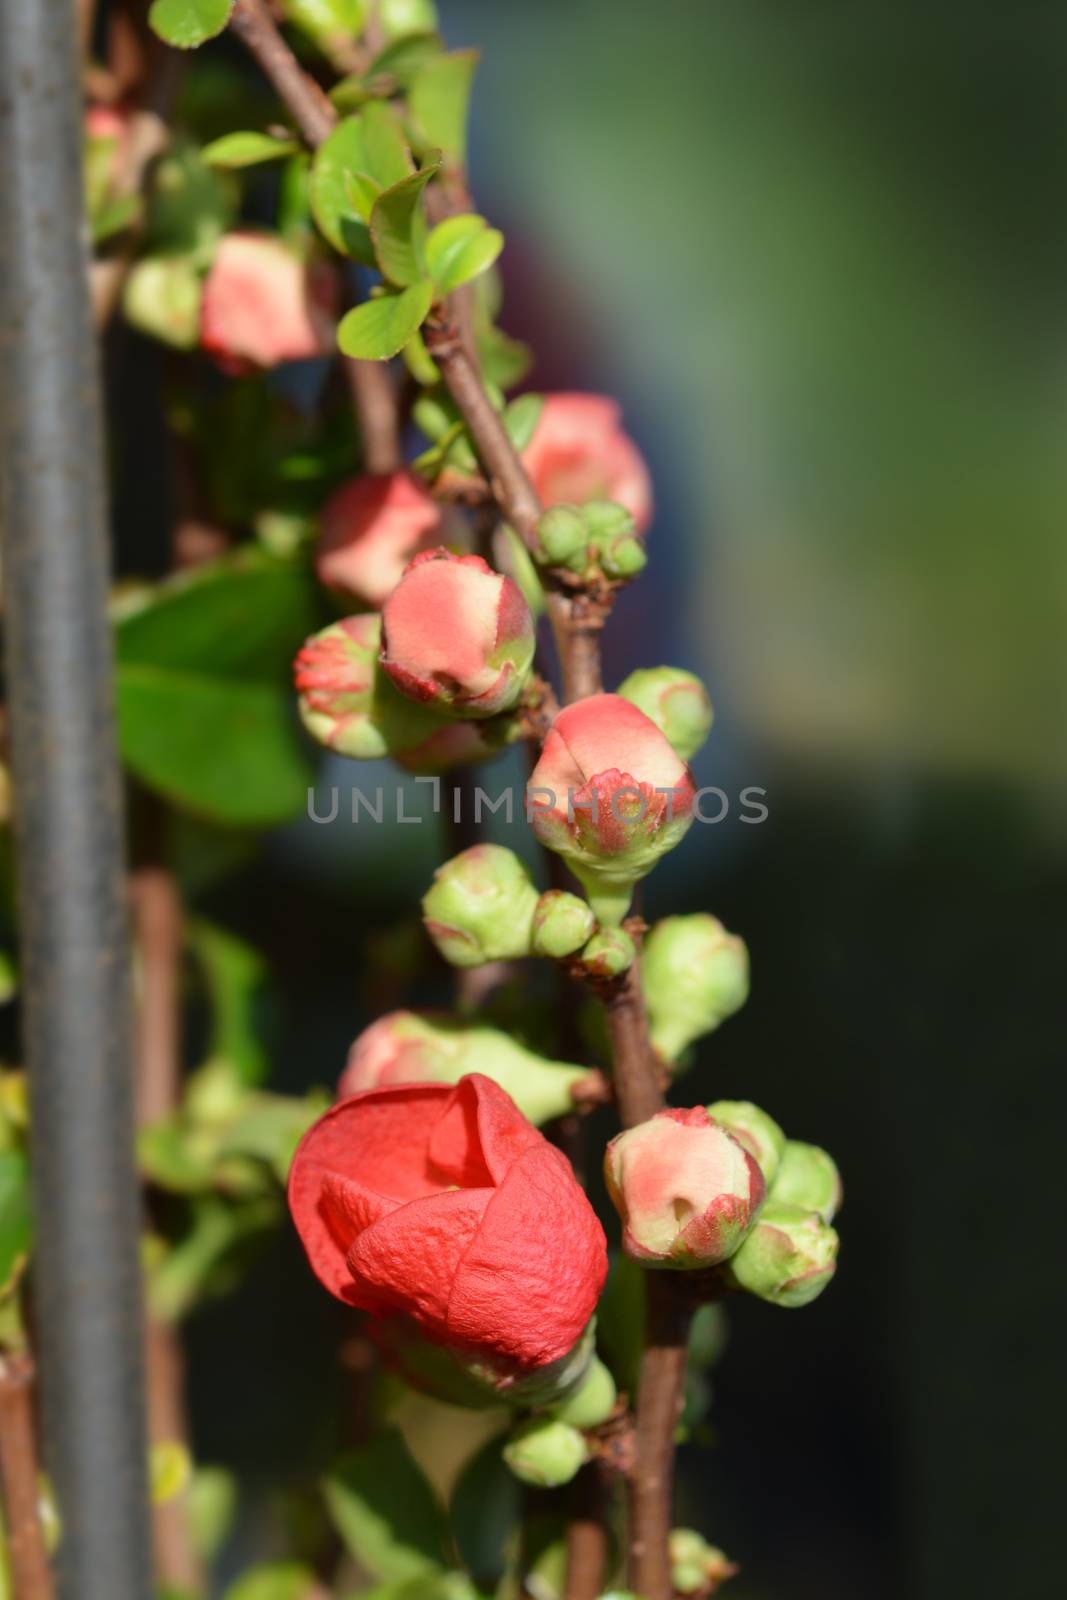 Texas Scarlet Flowering Quince by nahhan